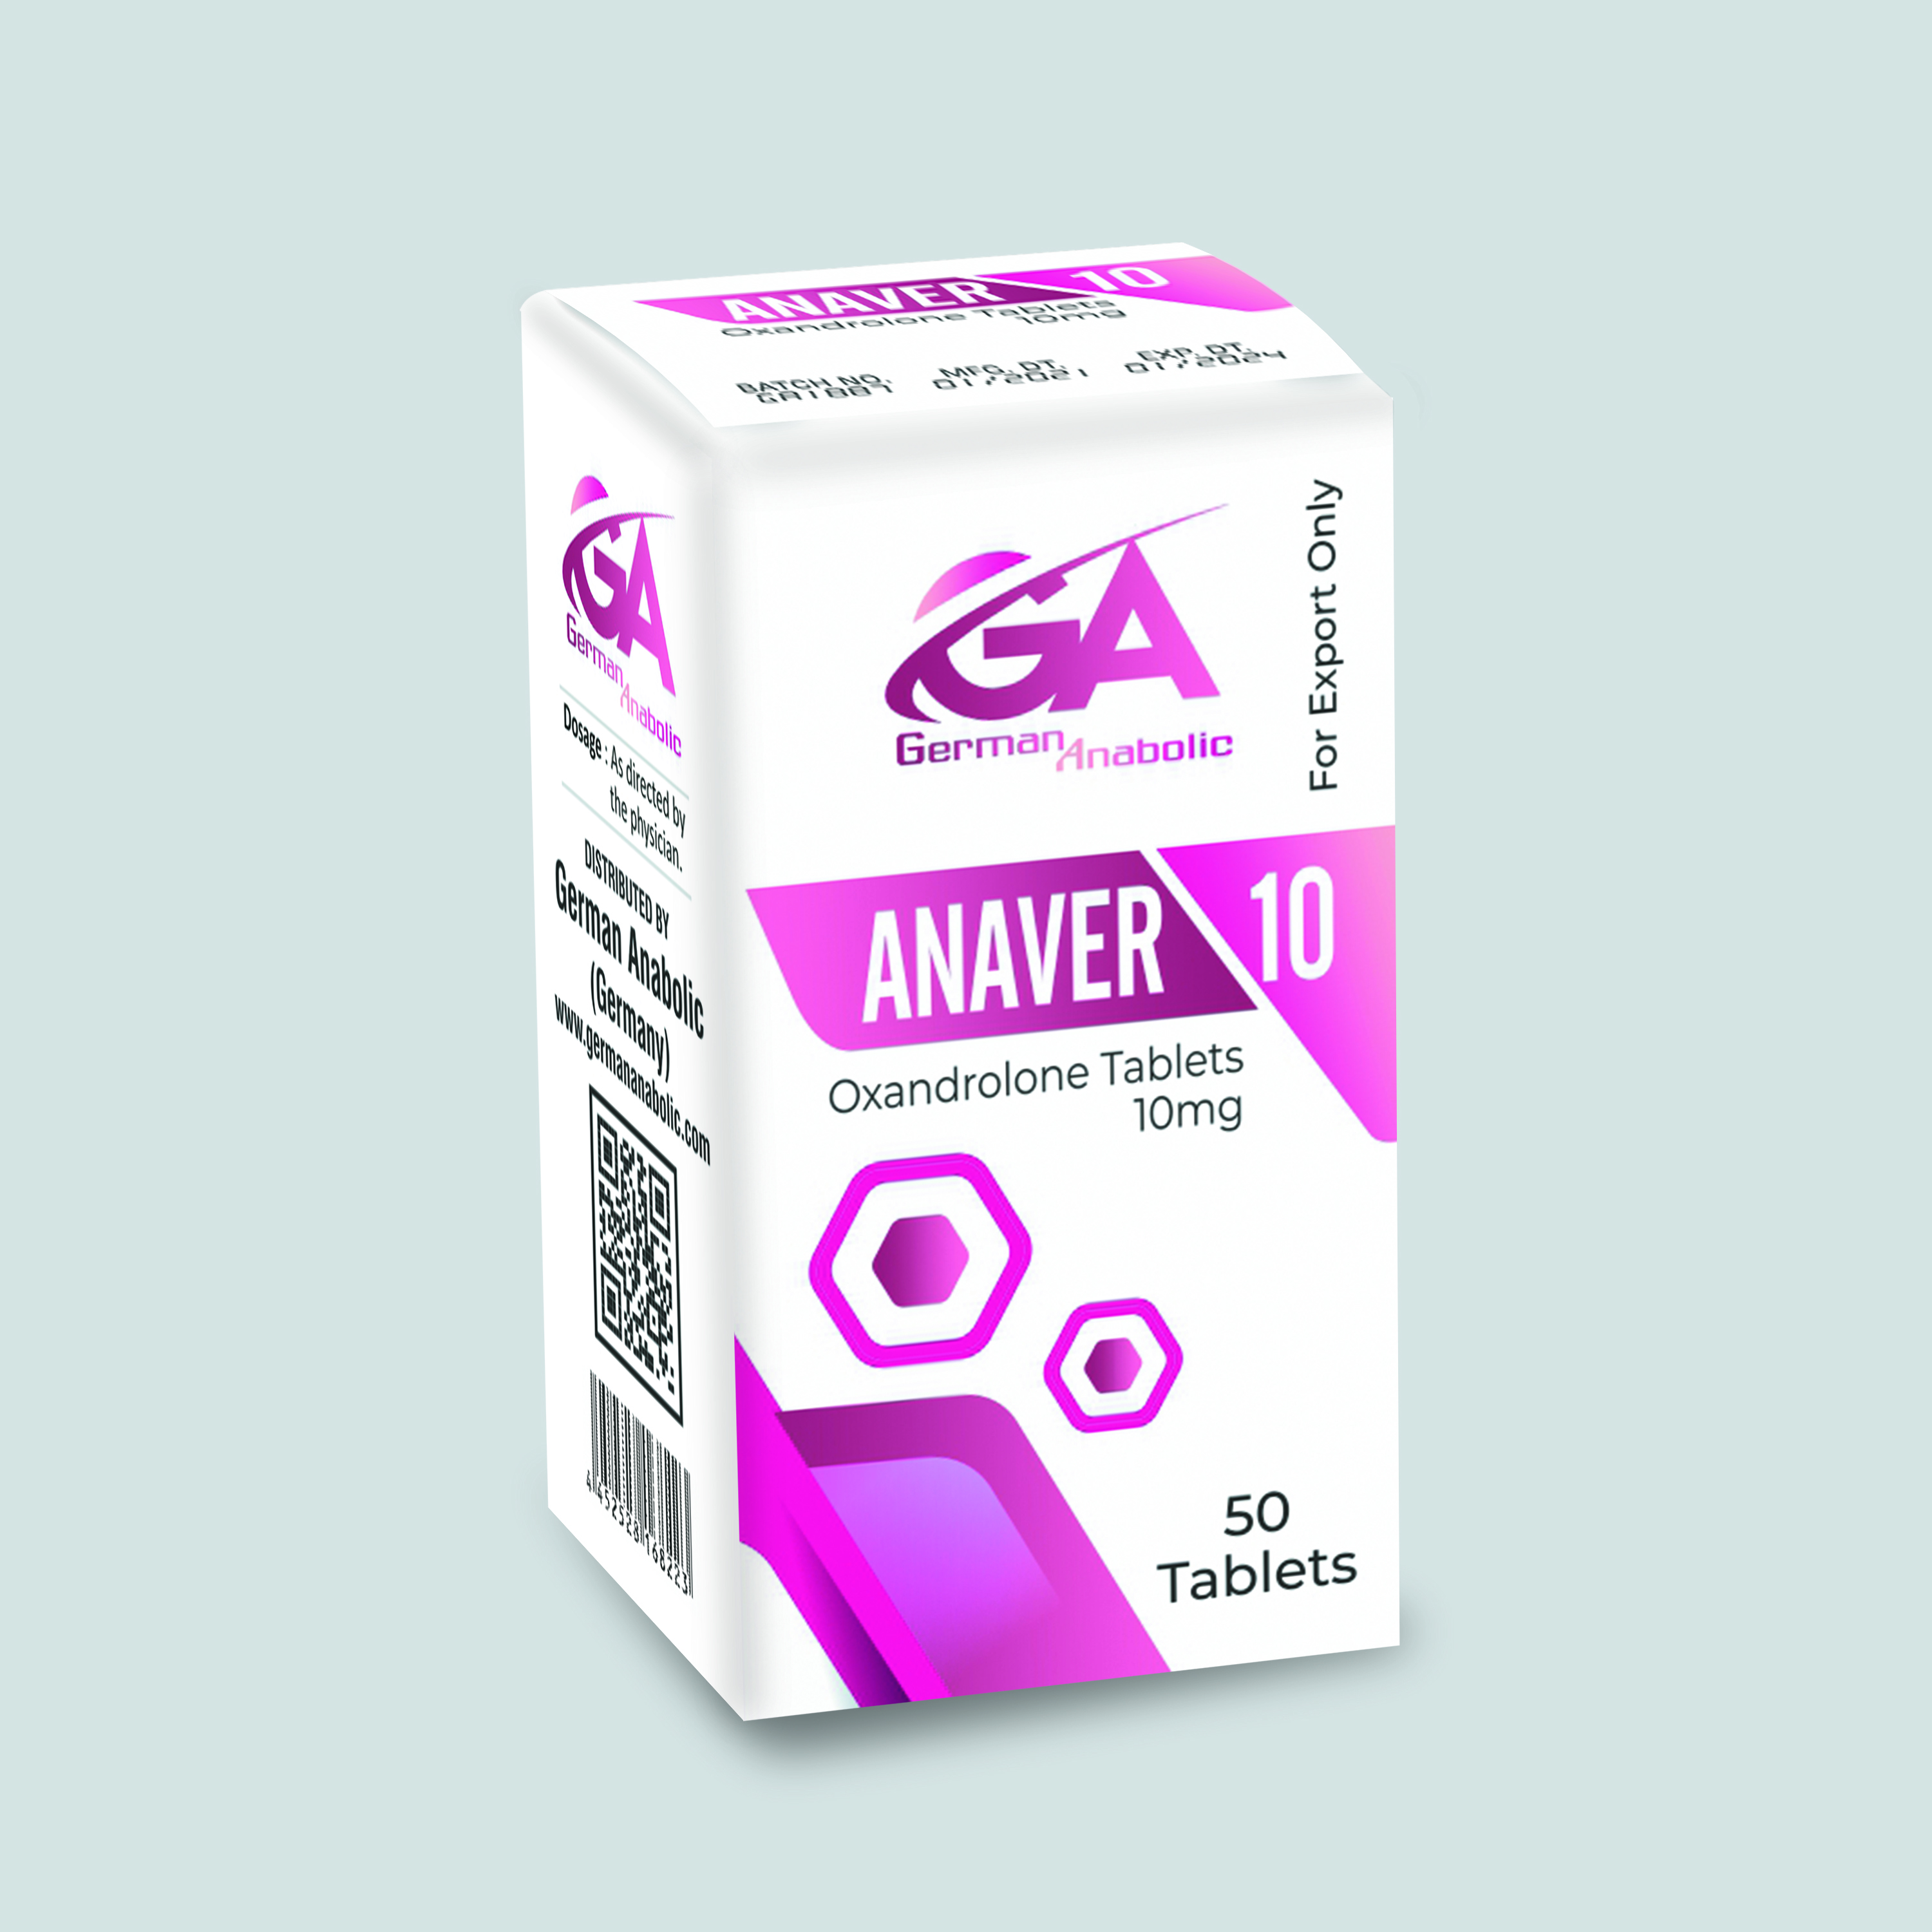 Anaver 10 oxandrolone tablets 10mg